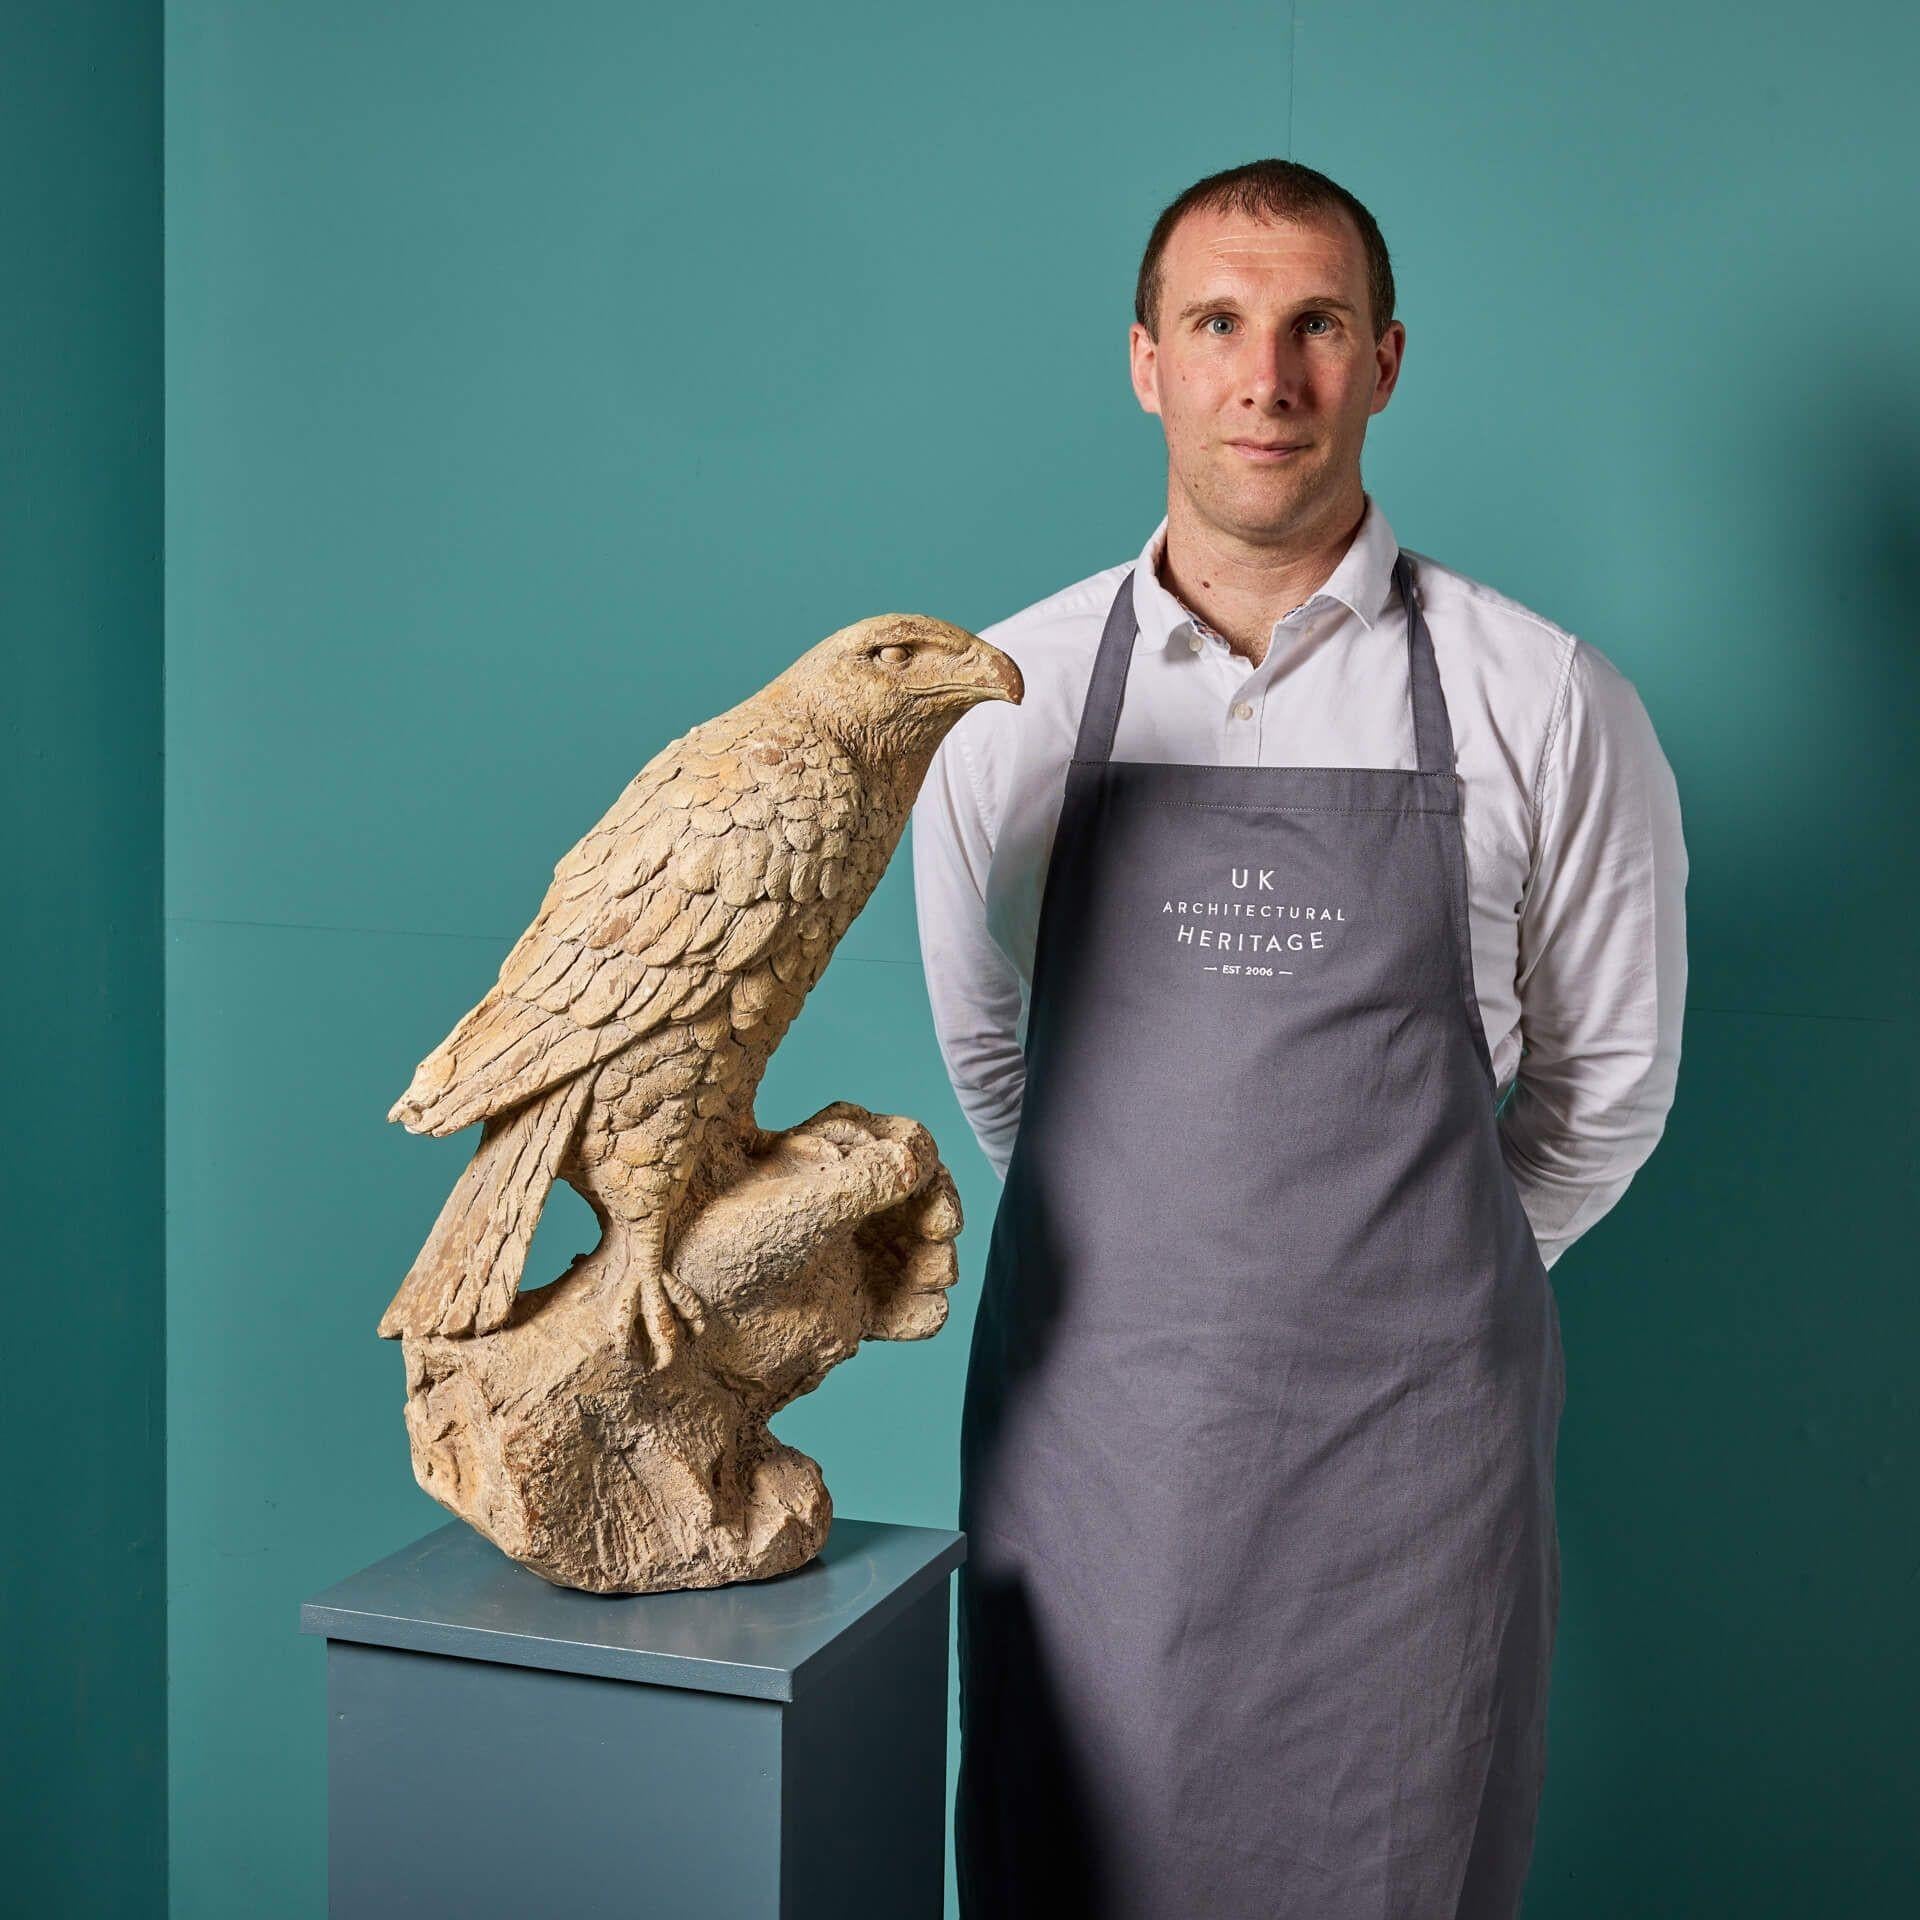 A reclaimed model sculpture of a bird of prey perched on a hand. At twice life size scale, this mid 20th century sculpture is an impressive decorative piece, with details of its wings, beak and face still beautifully carved in great detail. It is